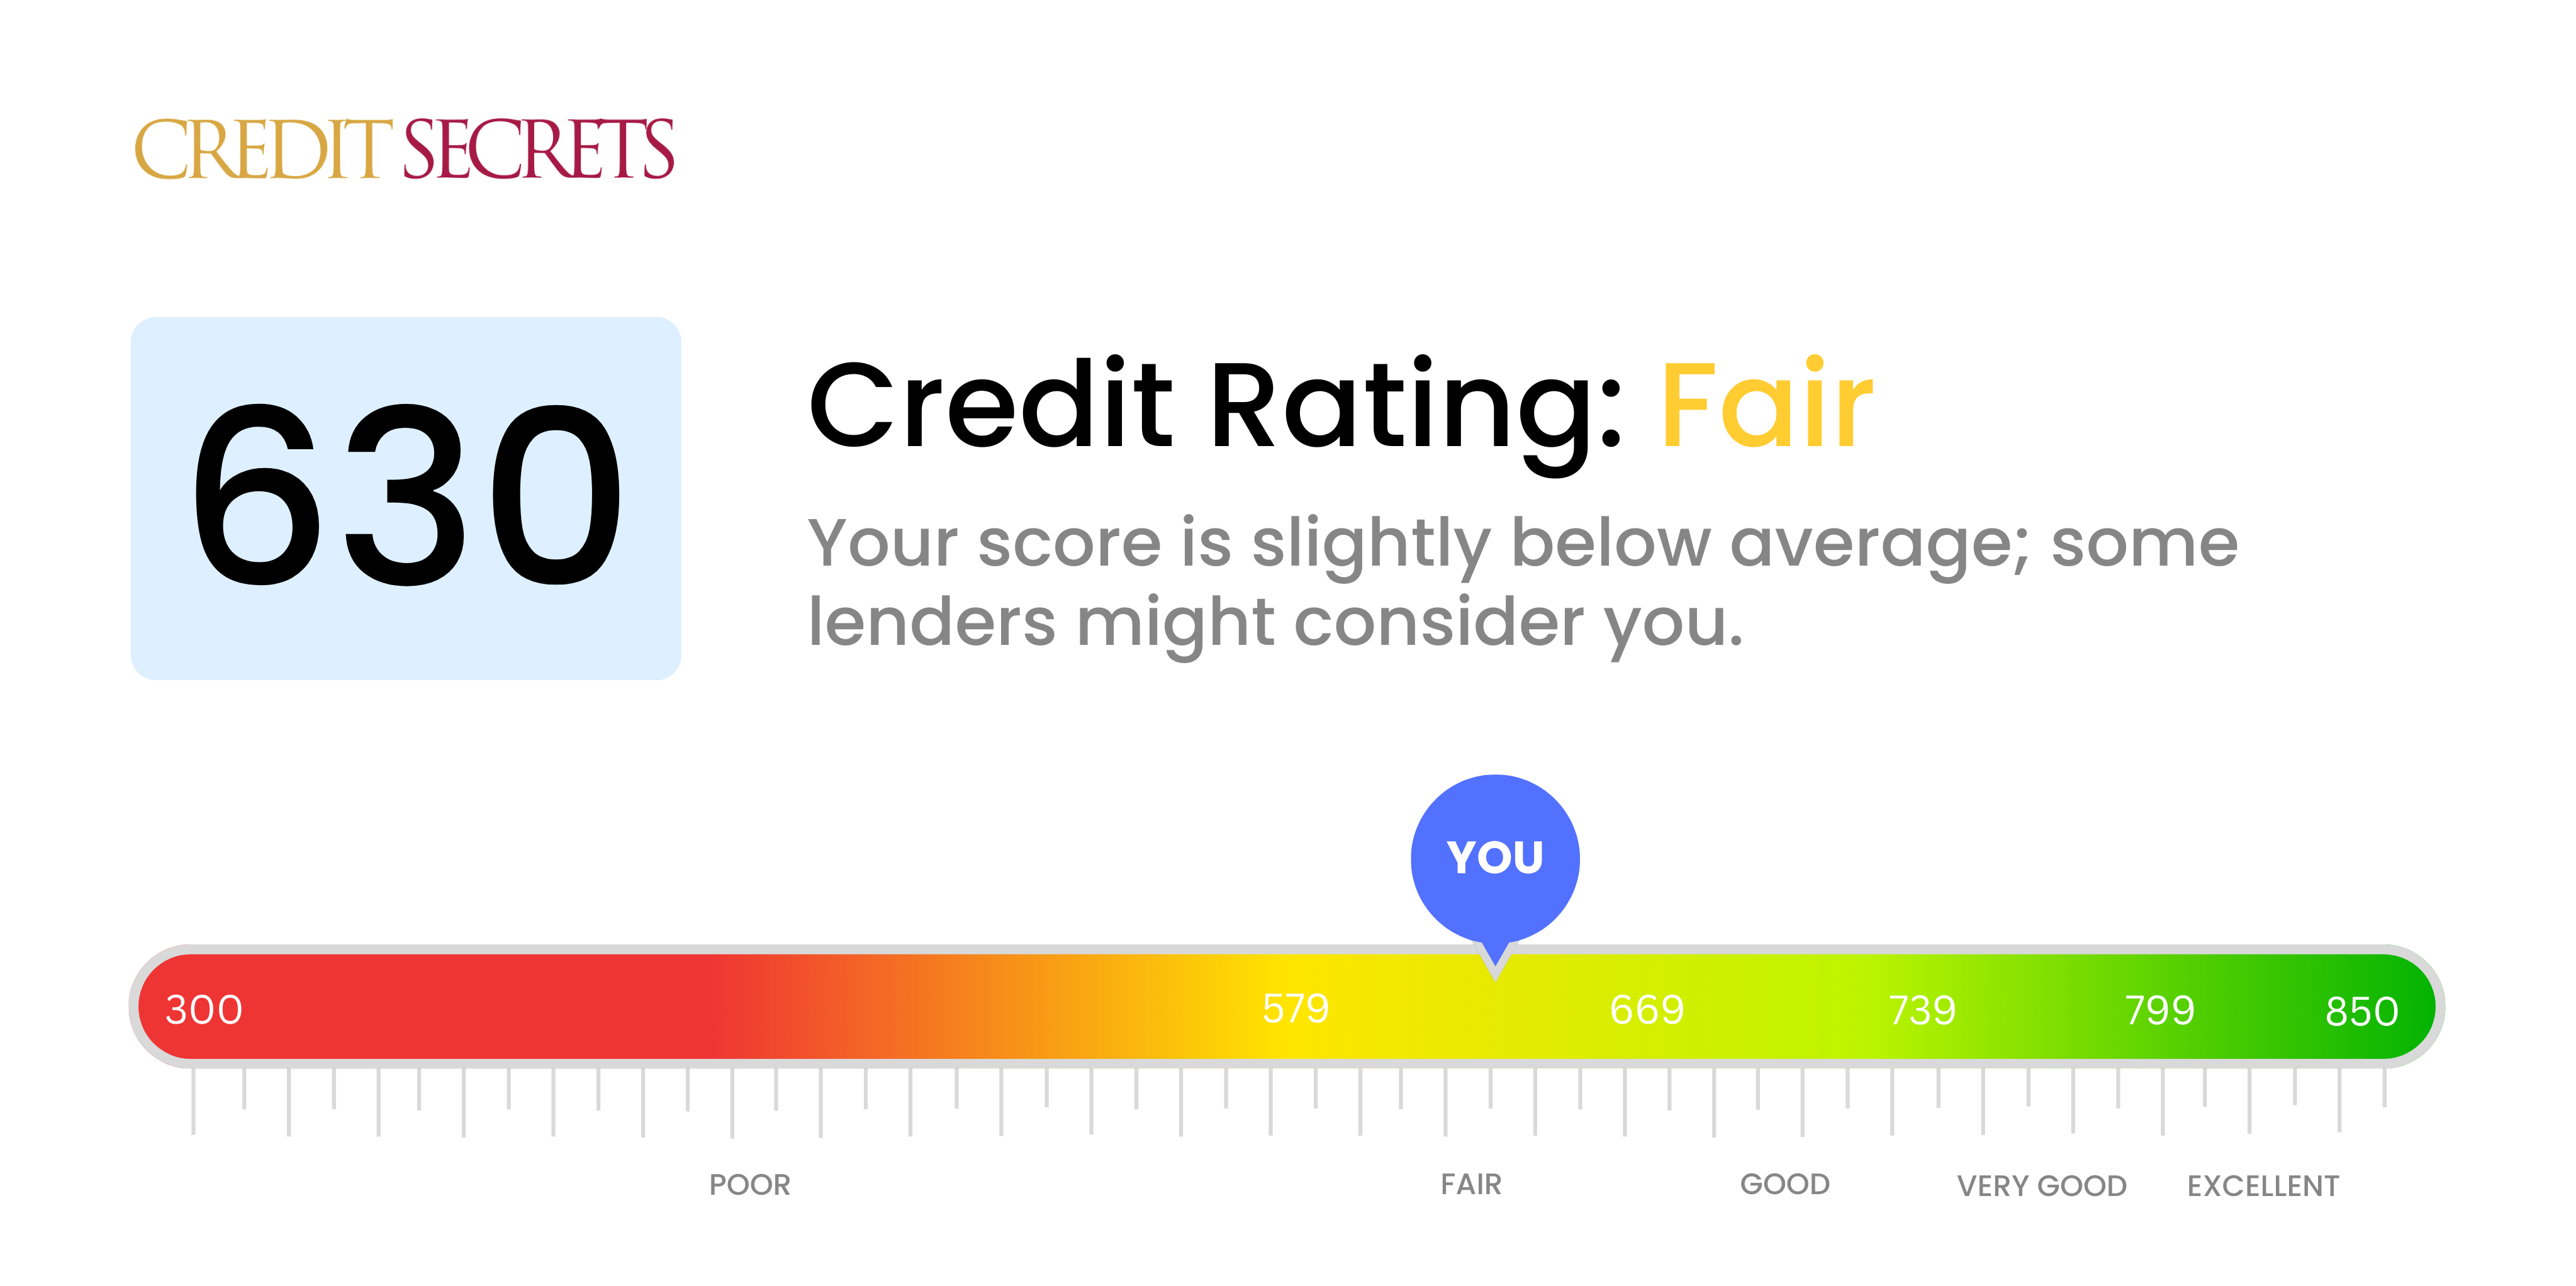 Is 630 a good credit score?